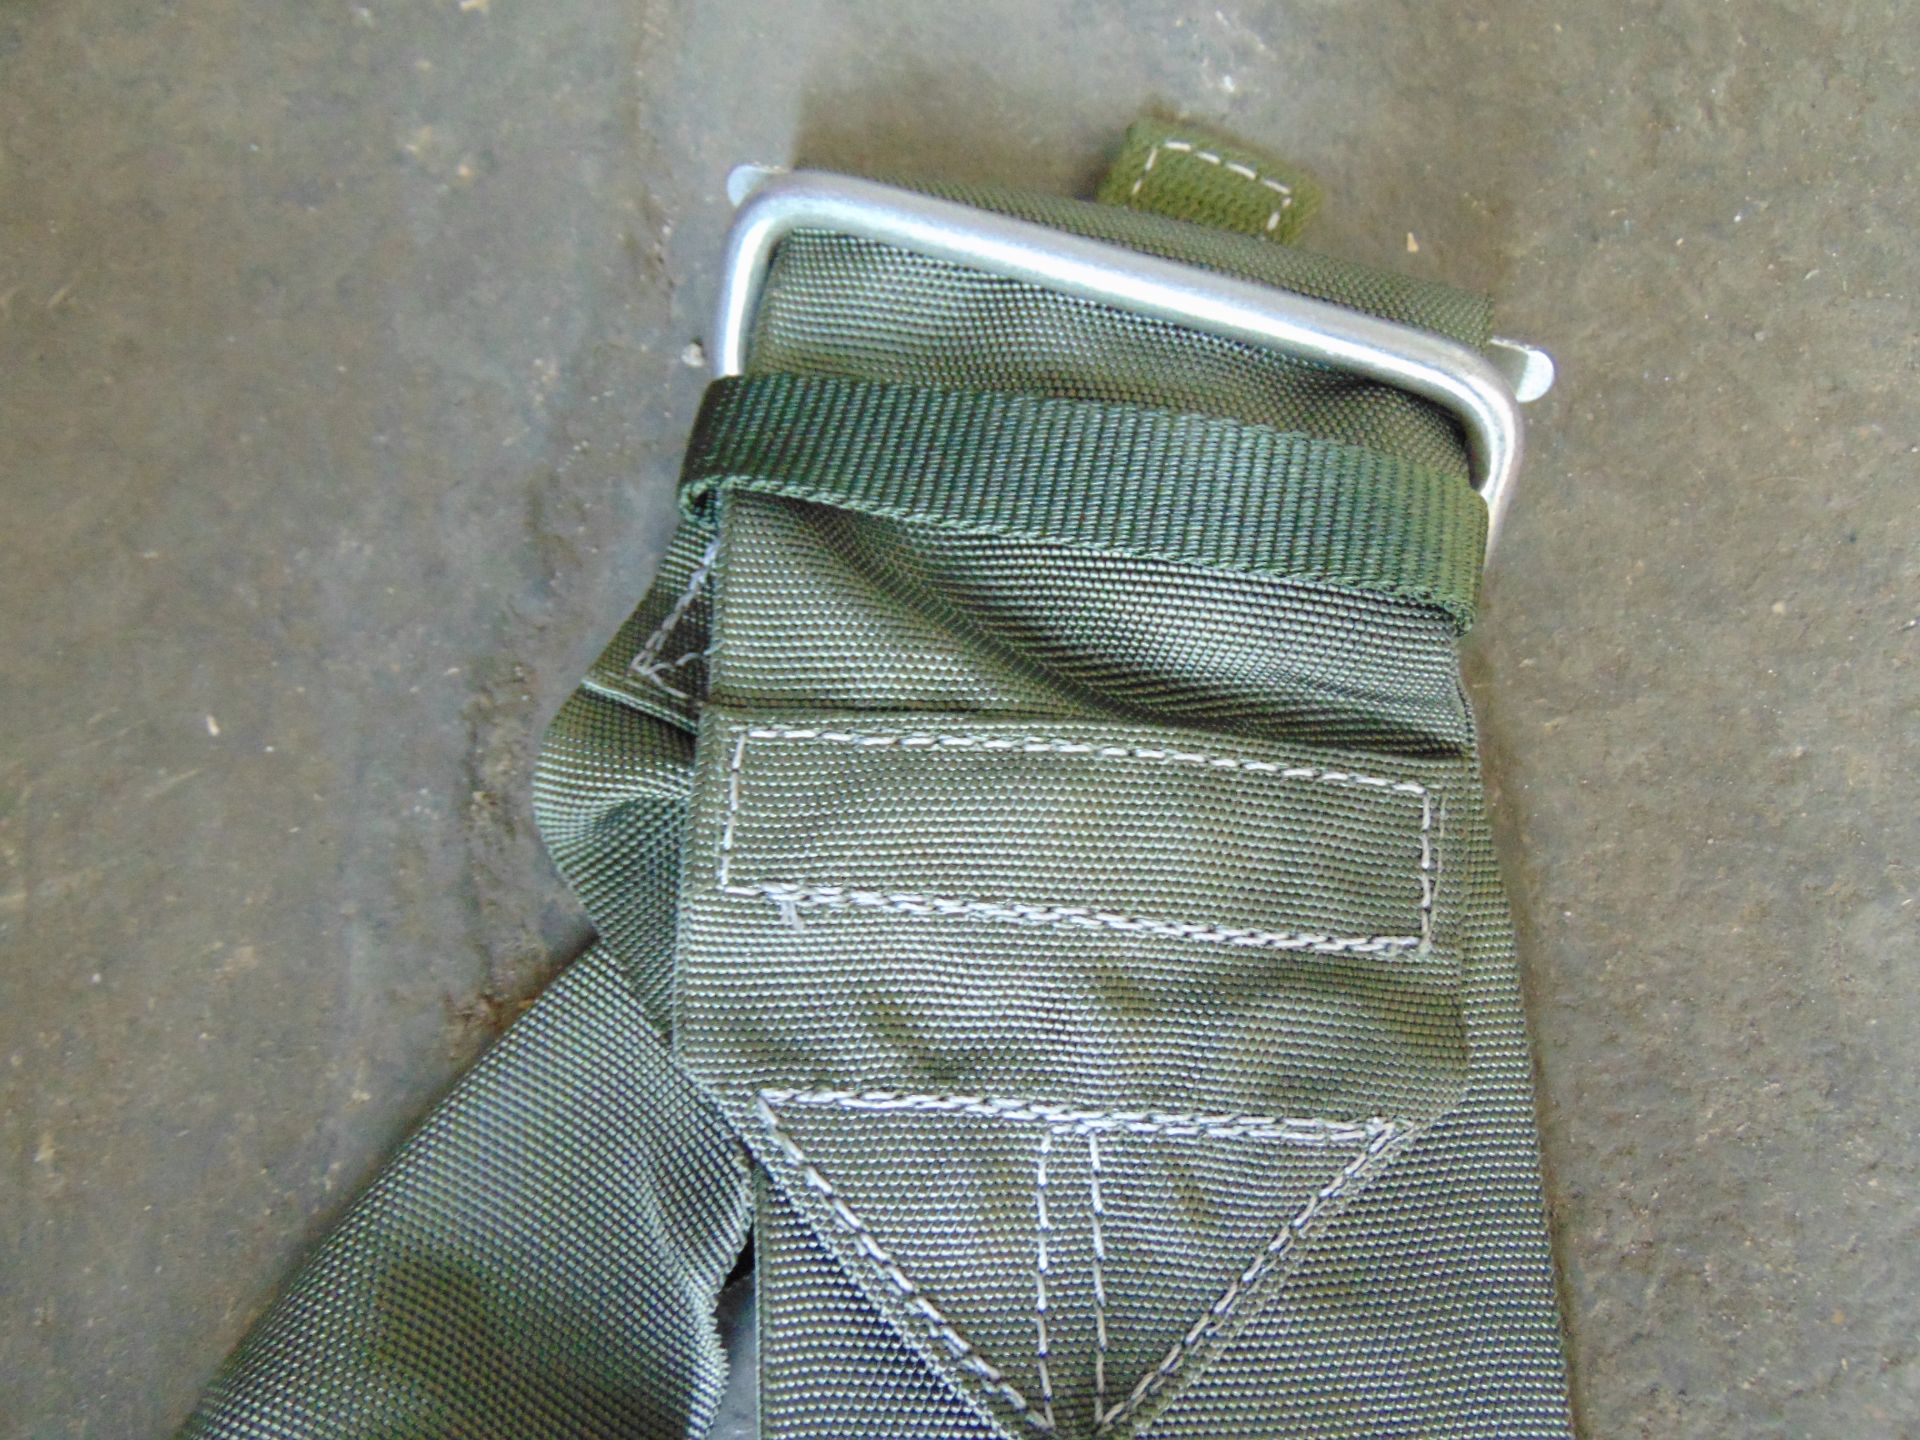 10 x Airborne Systems Ltd Casualty Saftey Harnesses - Image 4 of 7